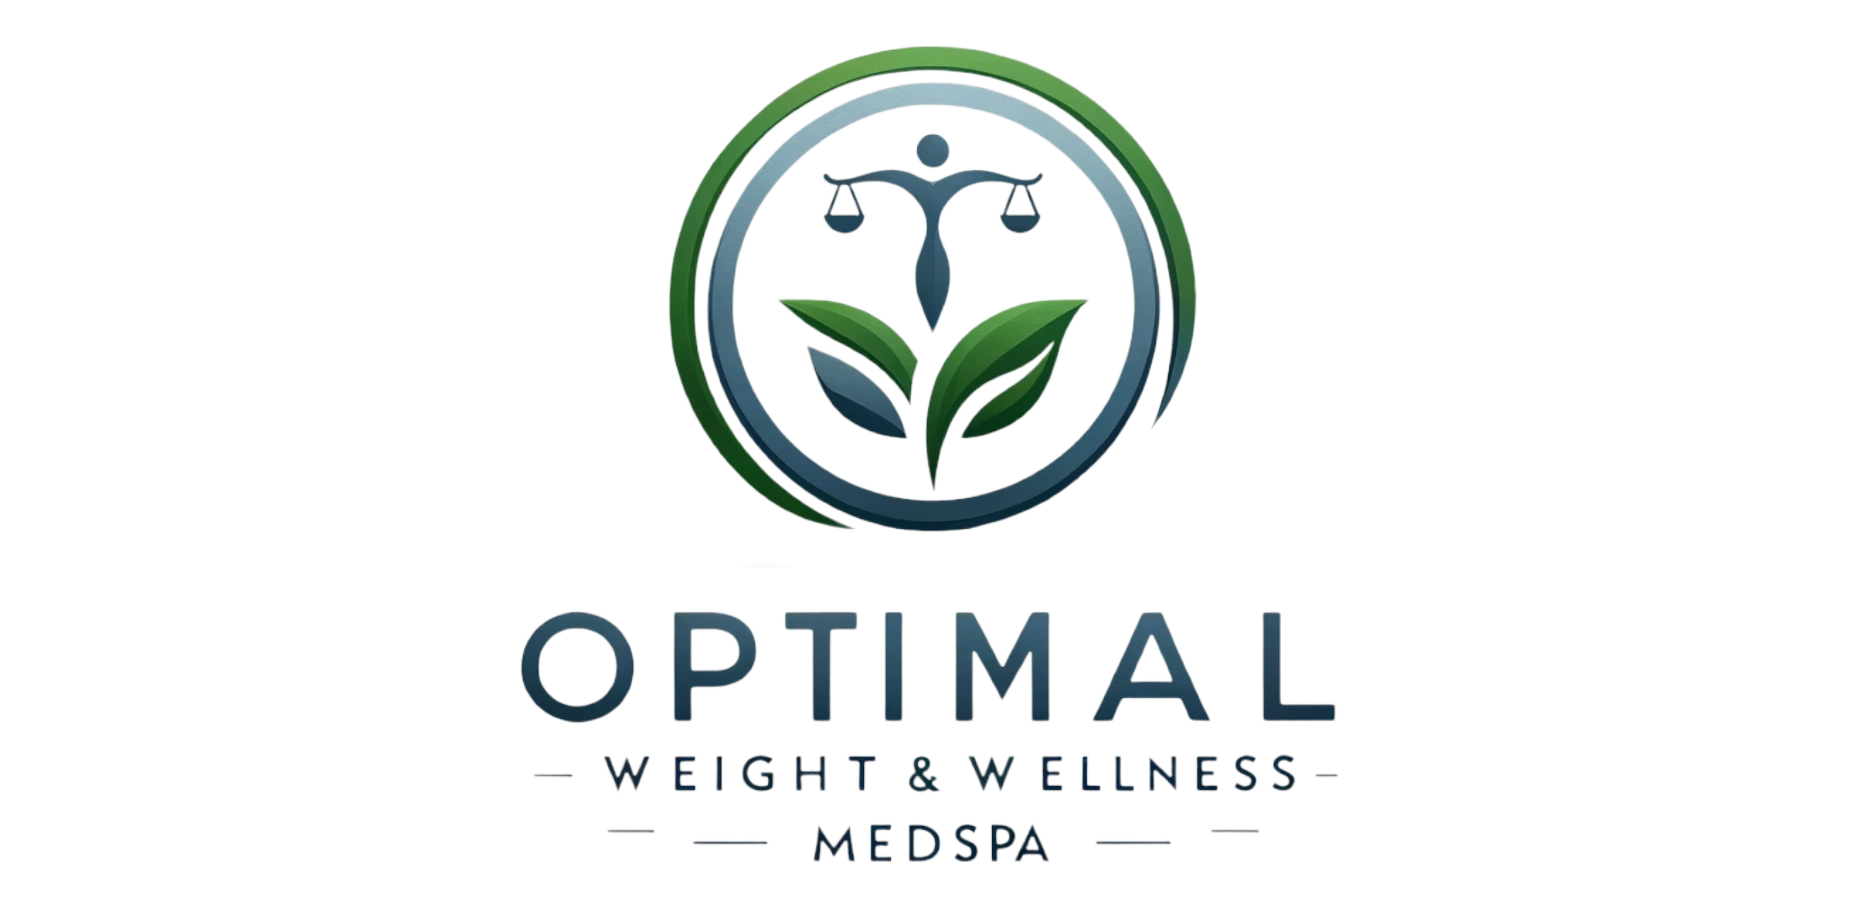 Optimal Weight & Wellness Logo is in shades of blue & green & is showing a human in perfect balance.